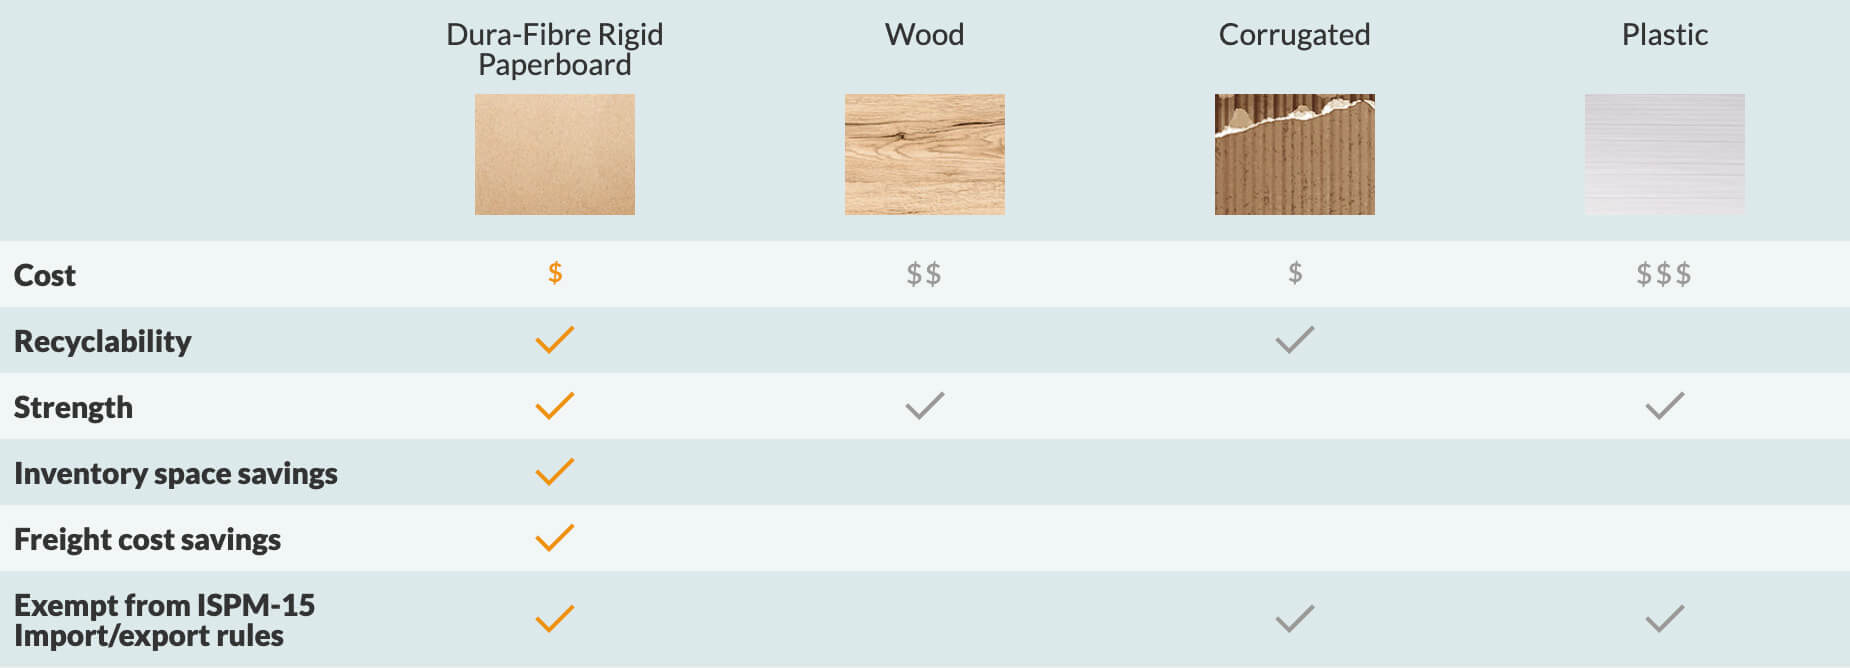 table comparing paperboard to wood, corrugated board, and plastic